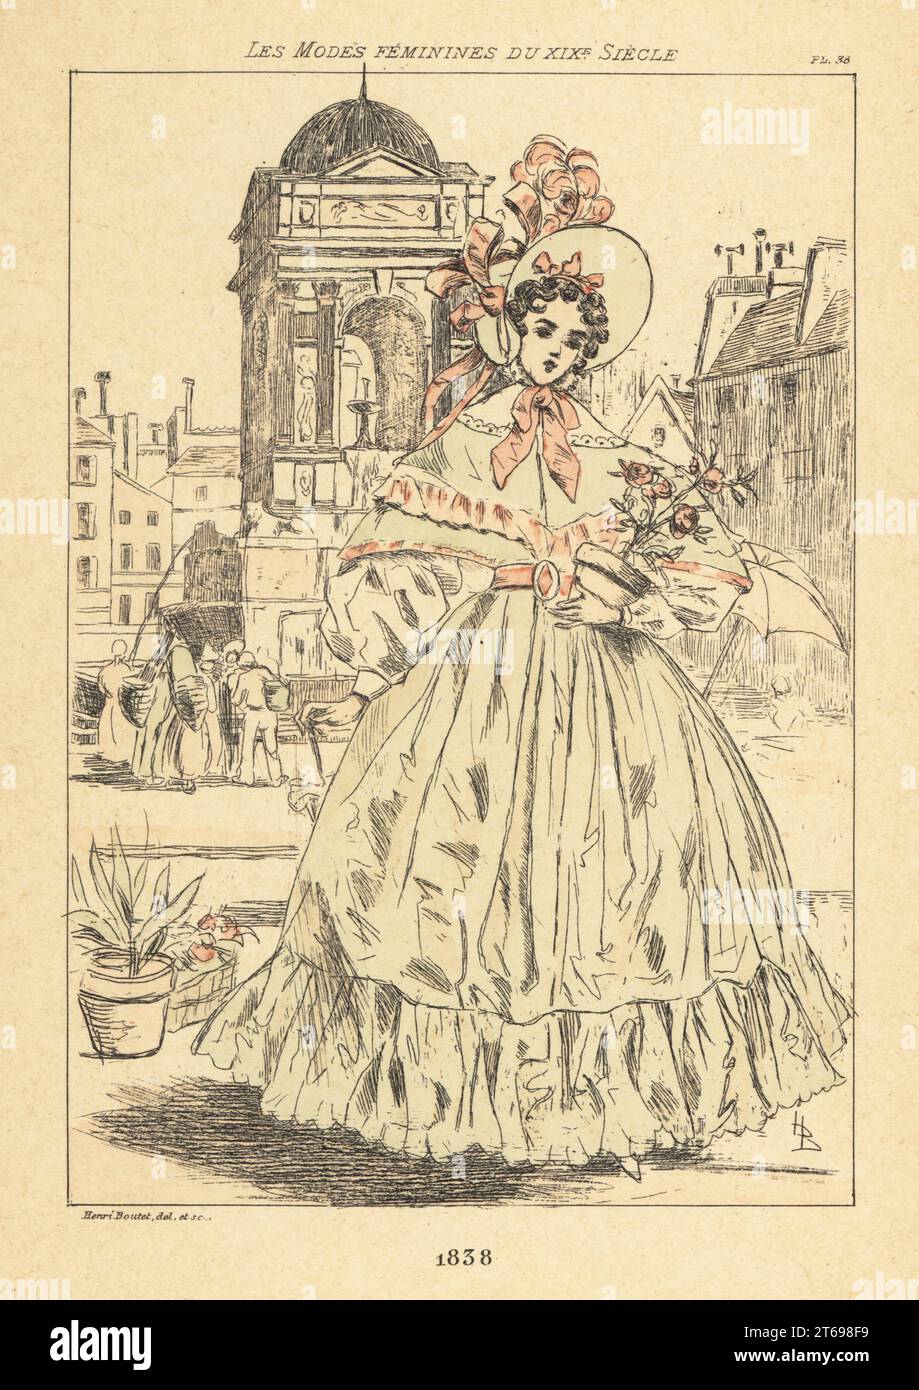 Fashionable lady holding a pot plant in front of the fontaine des Nymphes. In bonnet, dress with lace collar, capelet, ribbons and flounces. The Fountain of the Nymphs was built by Pierre Lescot in 1549 (now the Fontaine des Innocents, Marche des Innocents). Handcoloured drypoint or pointe-seche etching by Henri Boutet from Les Modes Feminines du XIXeme Siecle (Feminine Fashions of the 19th Century), Ernest Flammarion, Paris, 1902. Boutet (1851-1919) was a French artist, engraver, lithographer and designer. Stock Photo